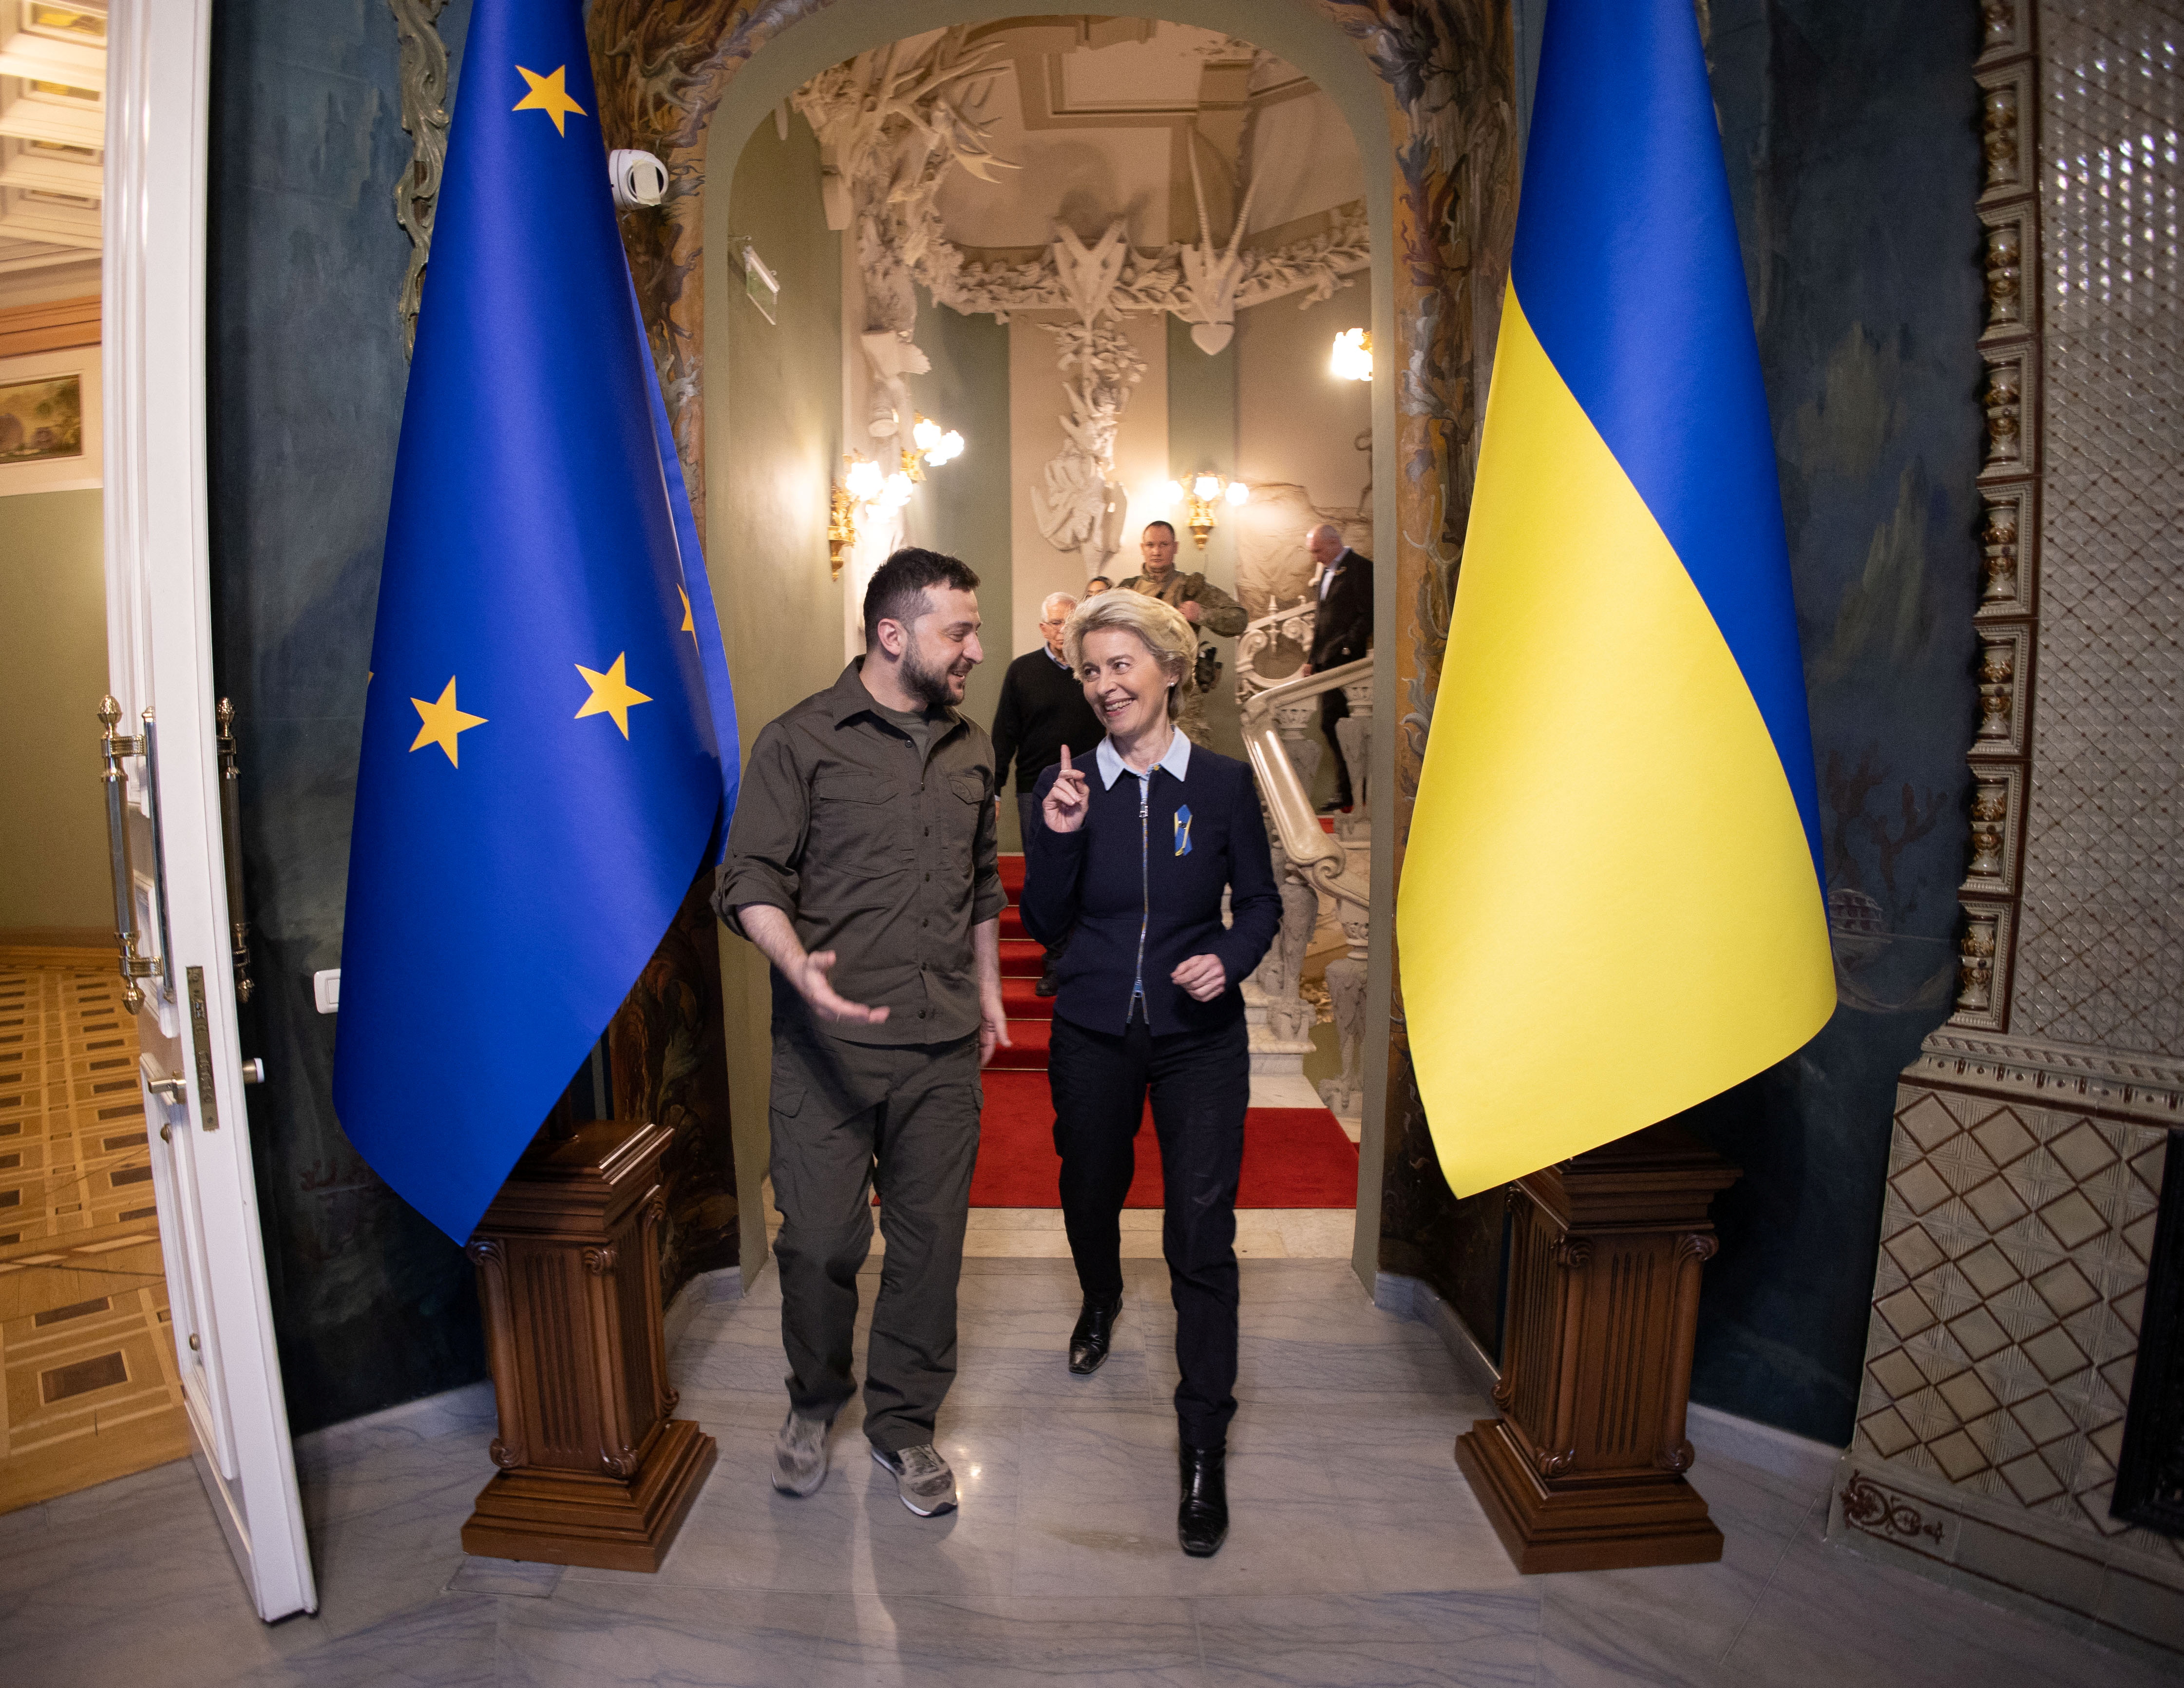 “It's good to be back in kyiv, my fourth time since the invasion of Russia.  This time, with my team of curators.  We are here together to show that the EU supports Ukraine as firmly as ever and further deepen our support and cooperation,